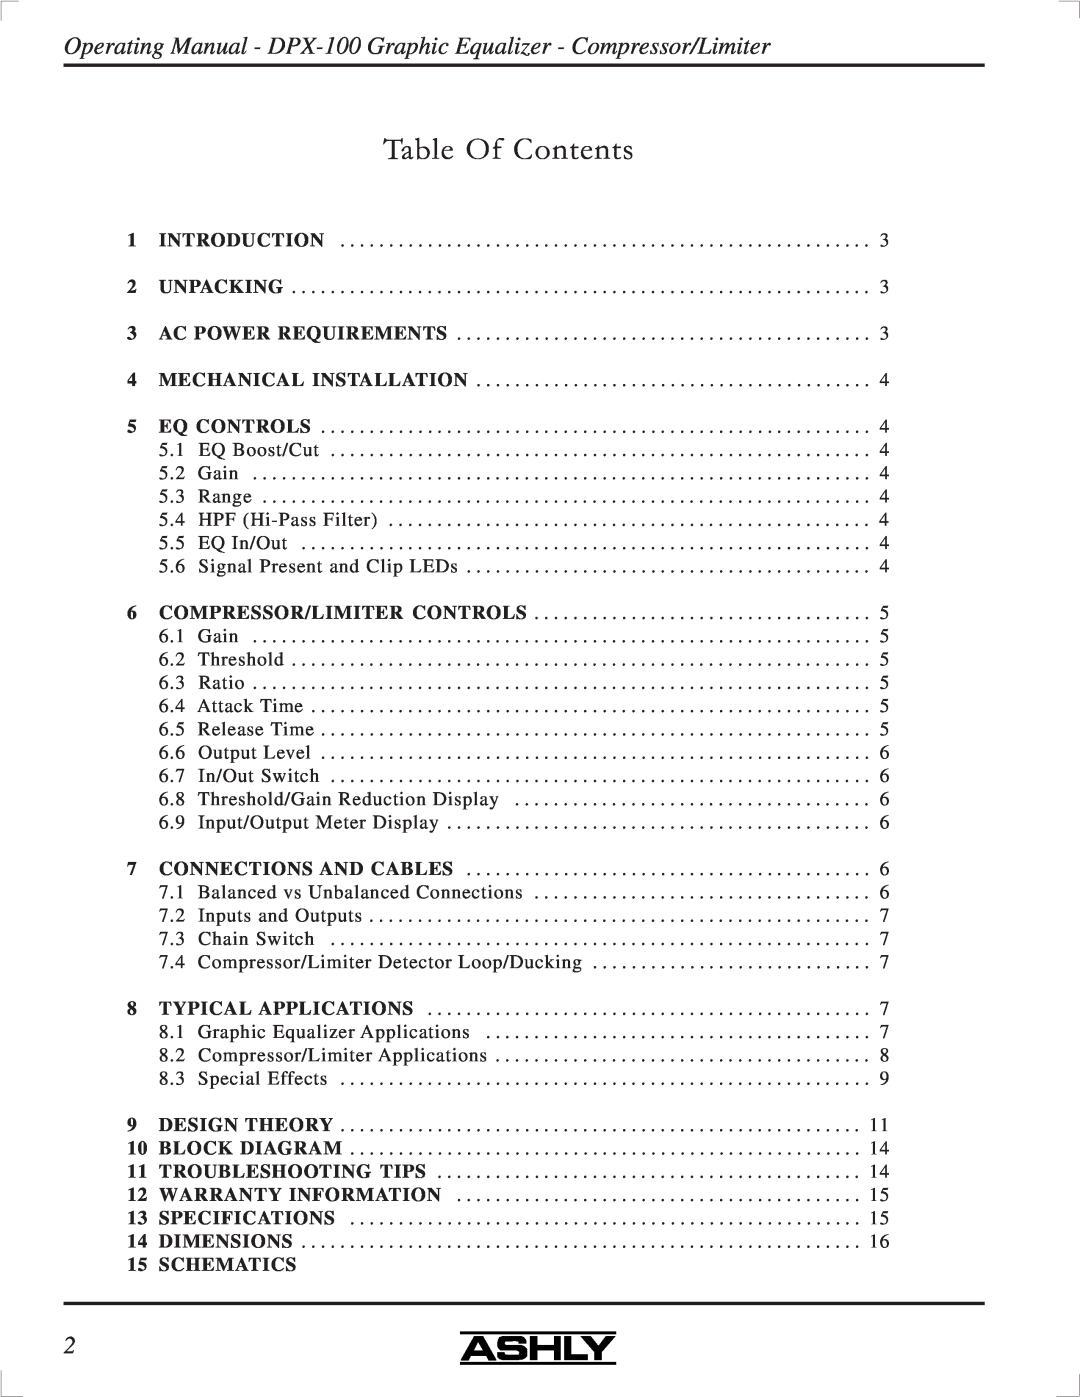 Ashly DPX-100 manual Table Of Contents, Schematics 